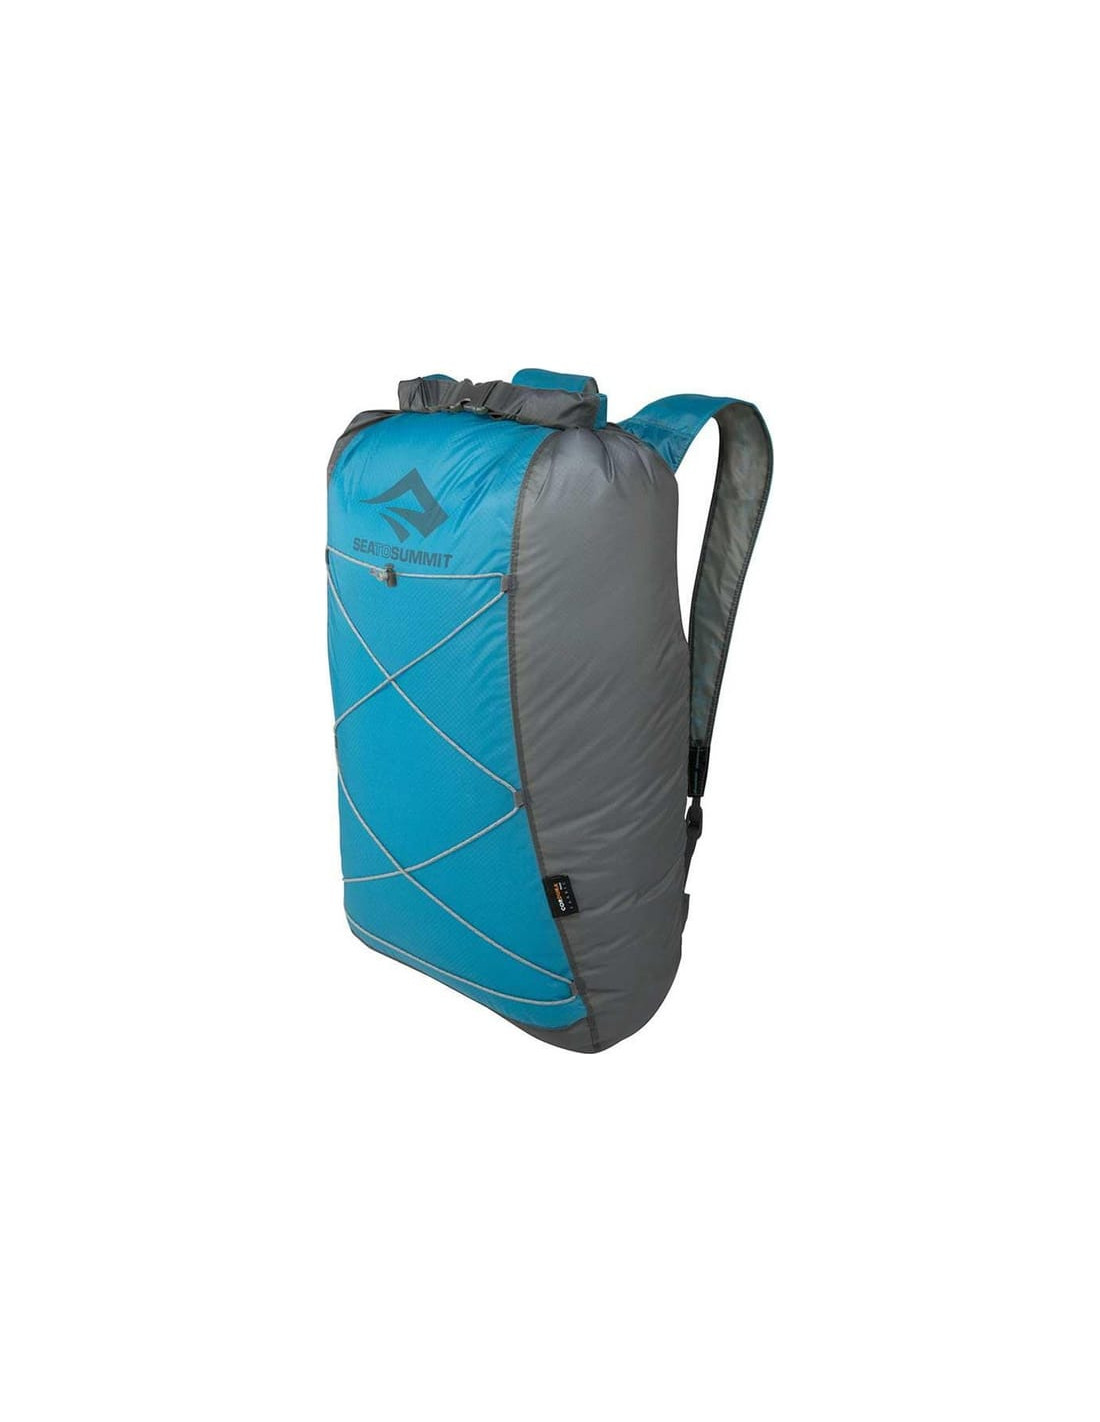 ULTRA-SIL DRY DAYPACK